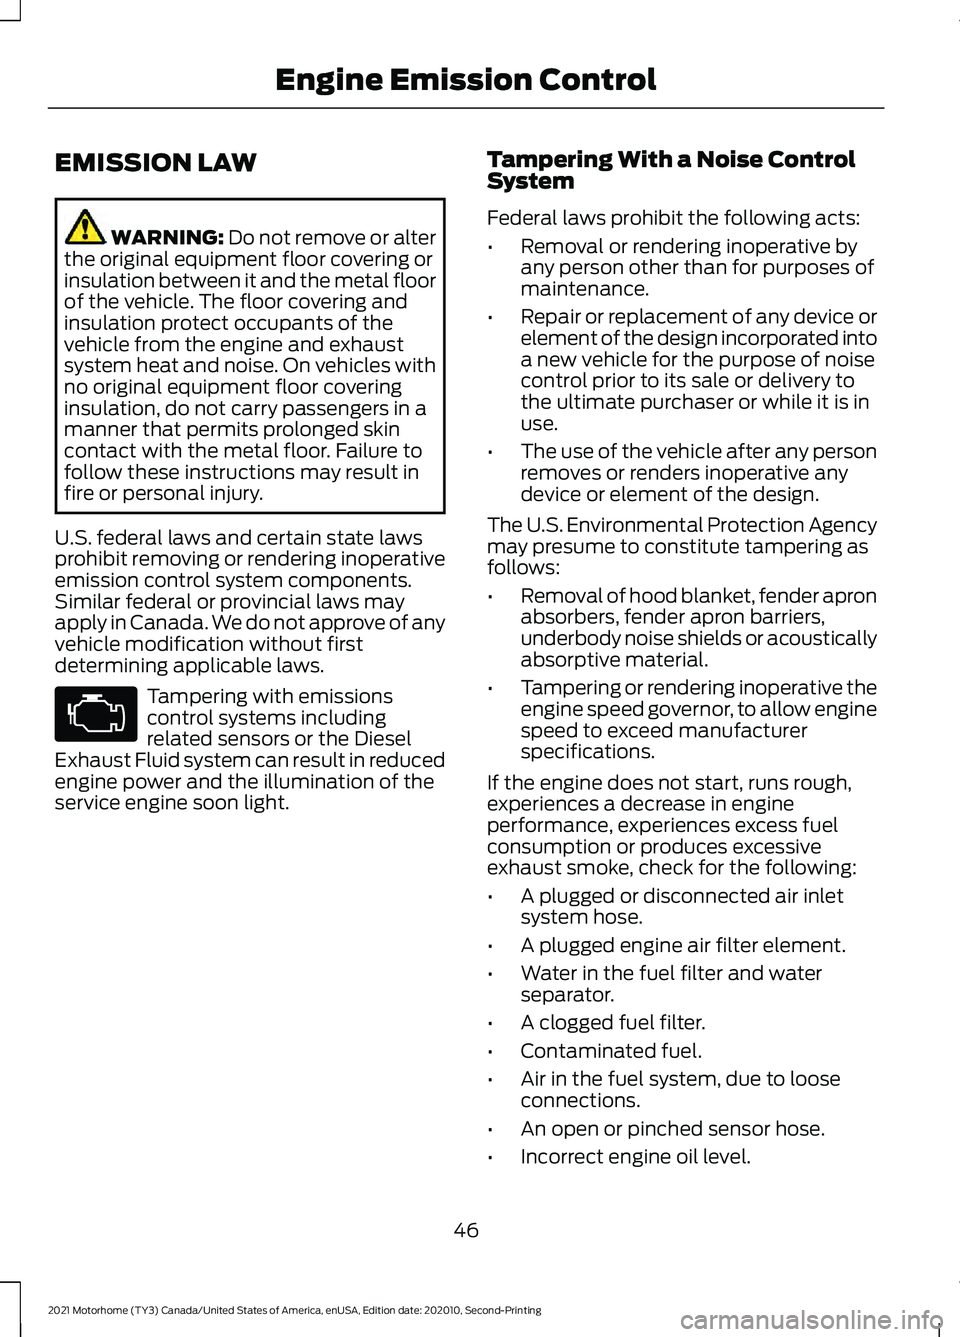 FORD F-53 2021  Owners Manual EMISSION LAW
WARNING: Do not remove or alter
the original equipment floor covering or
insulation between it and the metal floor
of the vehicle. The floor covering and
insulation protect occupants of t